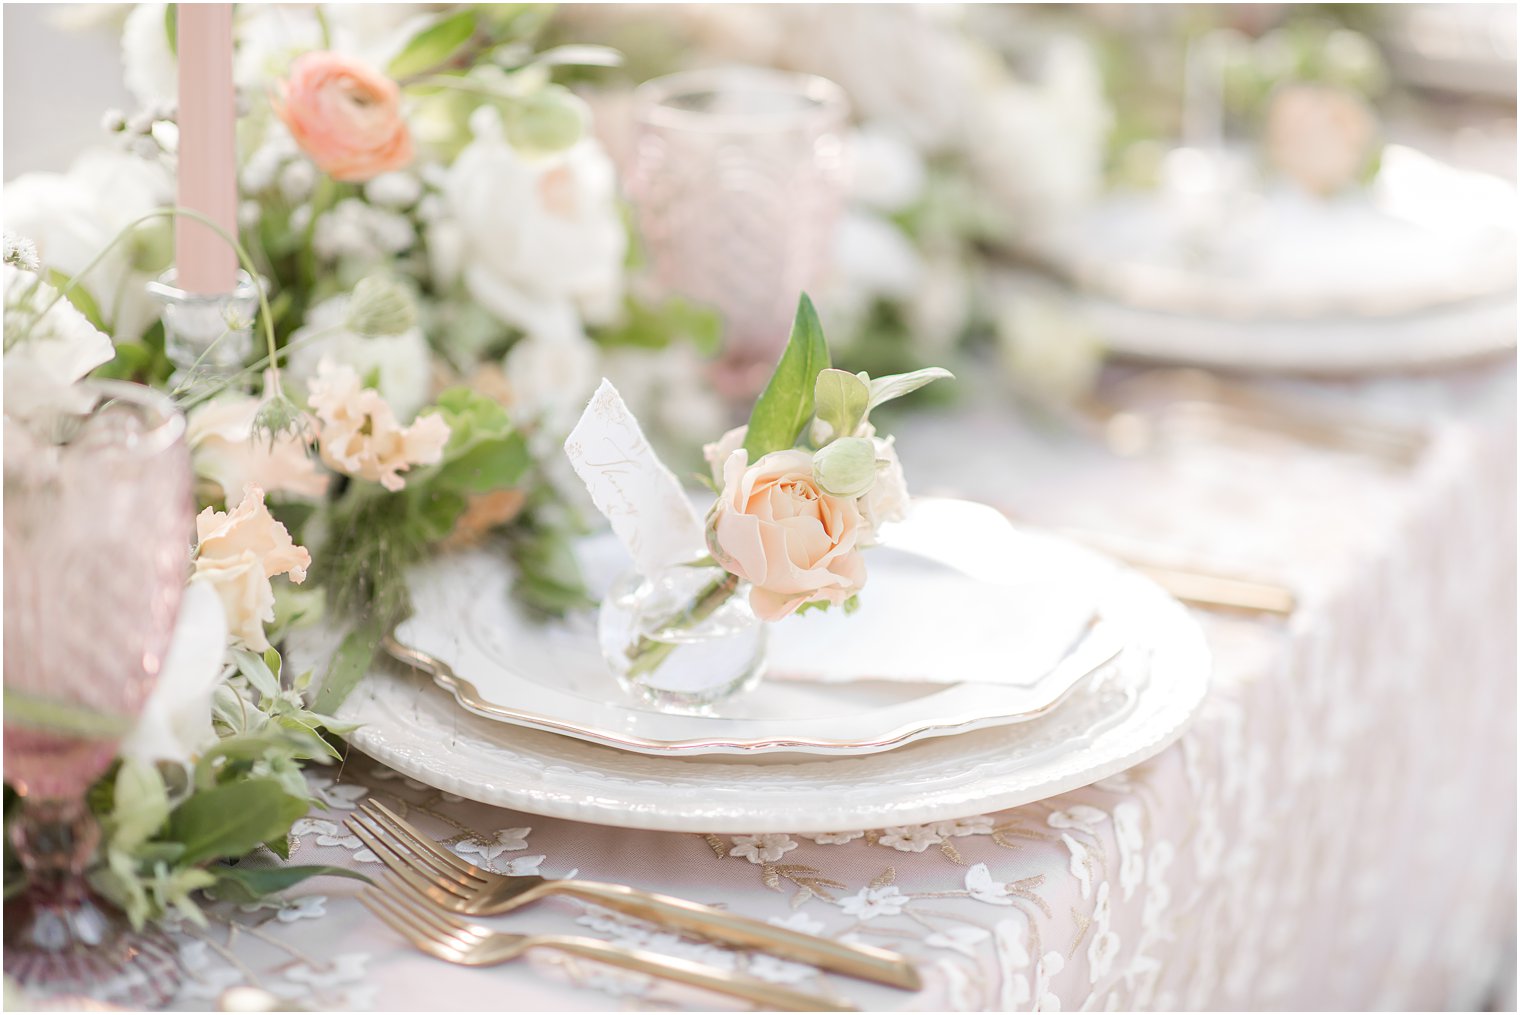 Romantic peach and cream wedding florals by Rosaspina Florist | Wedding at Park Chateau Estate